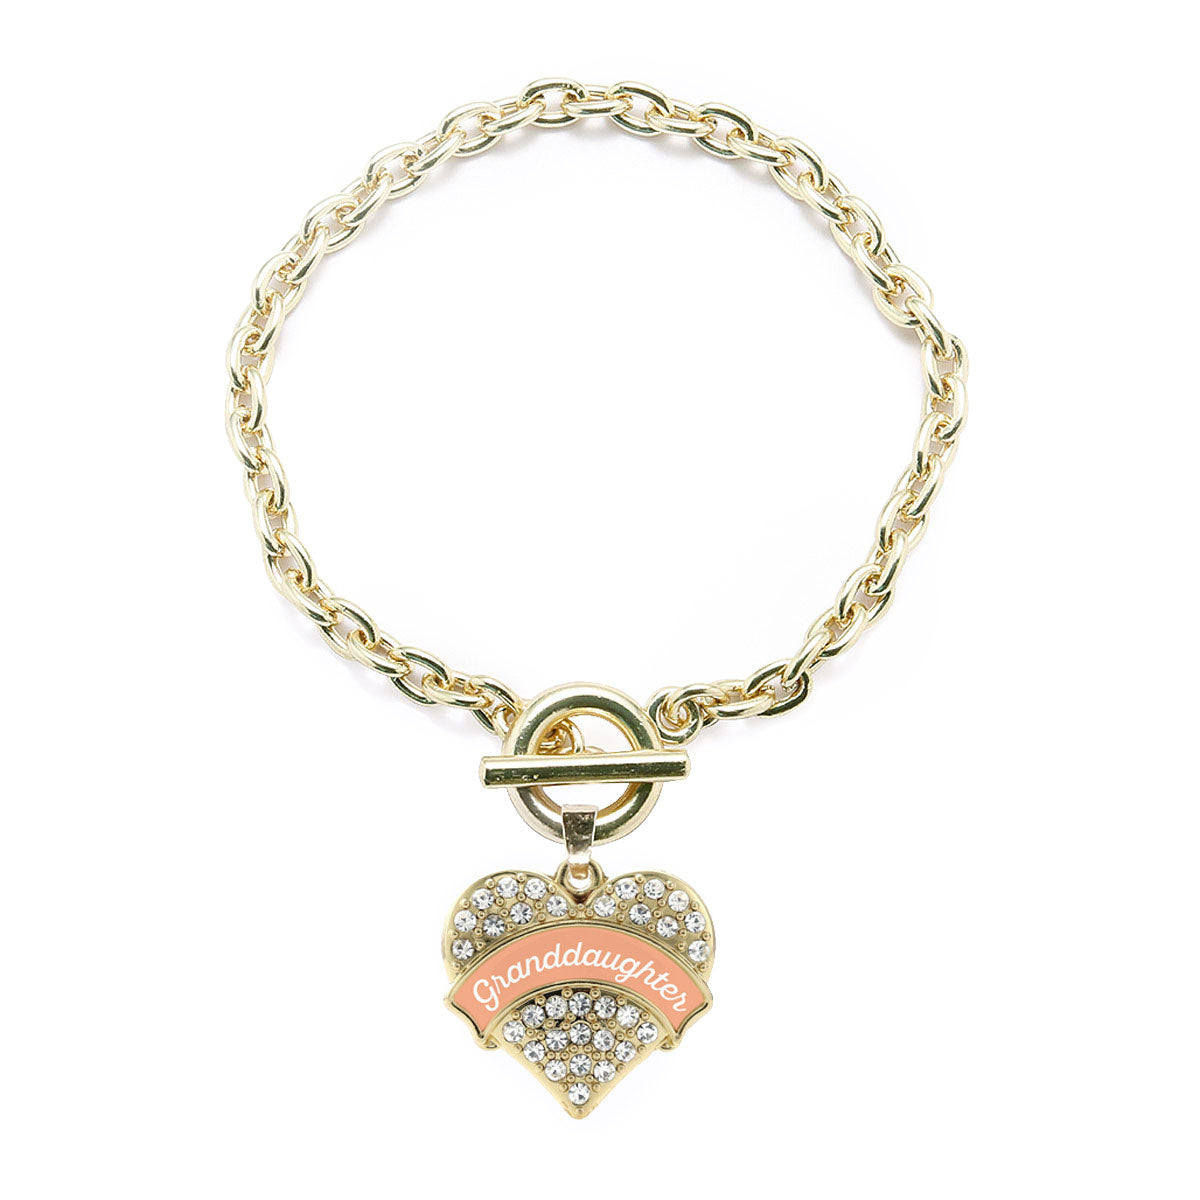 Gold Peach Granddaughter Pave Heart Charm Toggle Bracelet